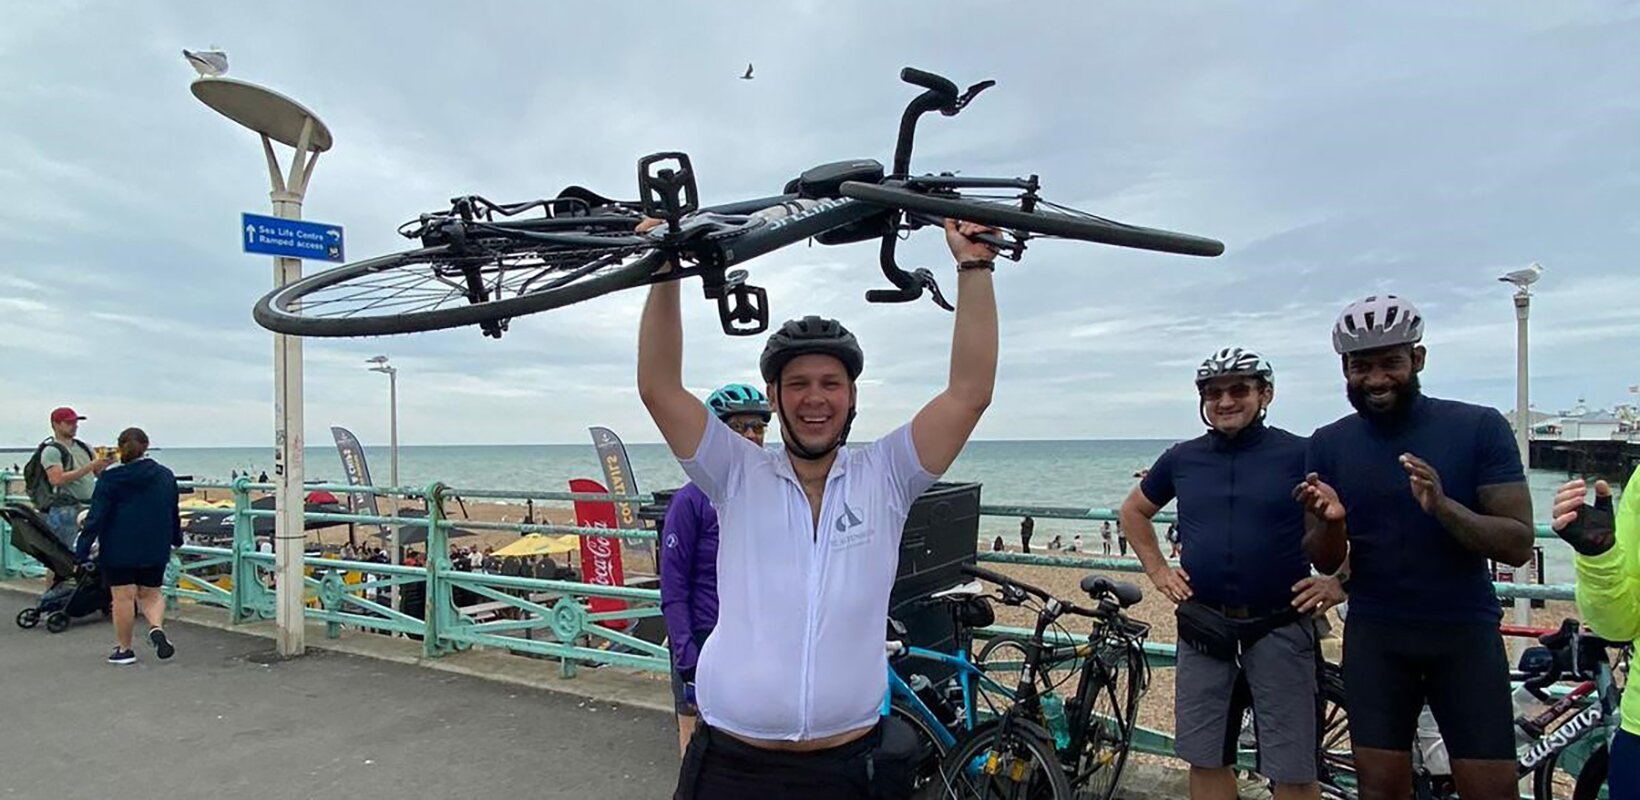 How amputee Zoltan Szakacsi overcame a traumatic accident with triumphant cycle